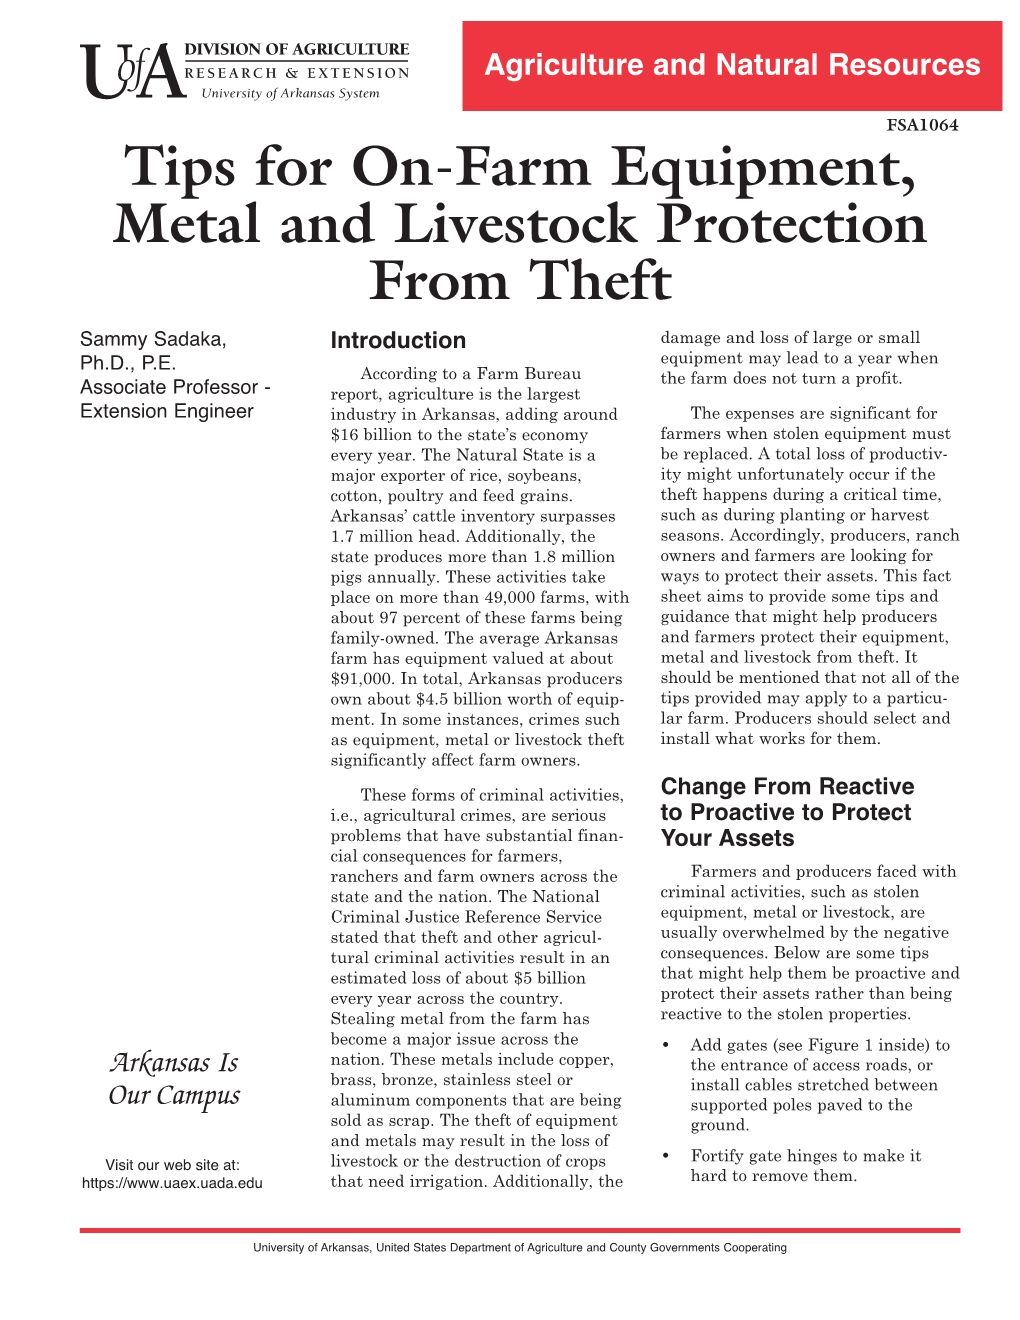 Tips for On-Farm Equipment, Metal and Livestock Protection from Theft